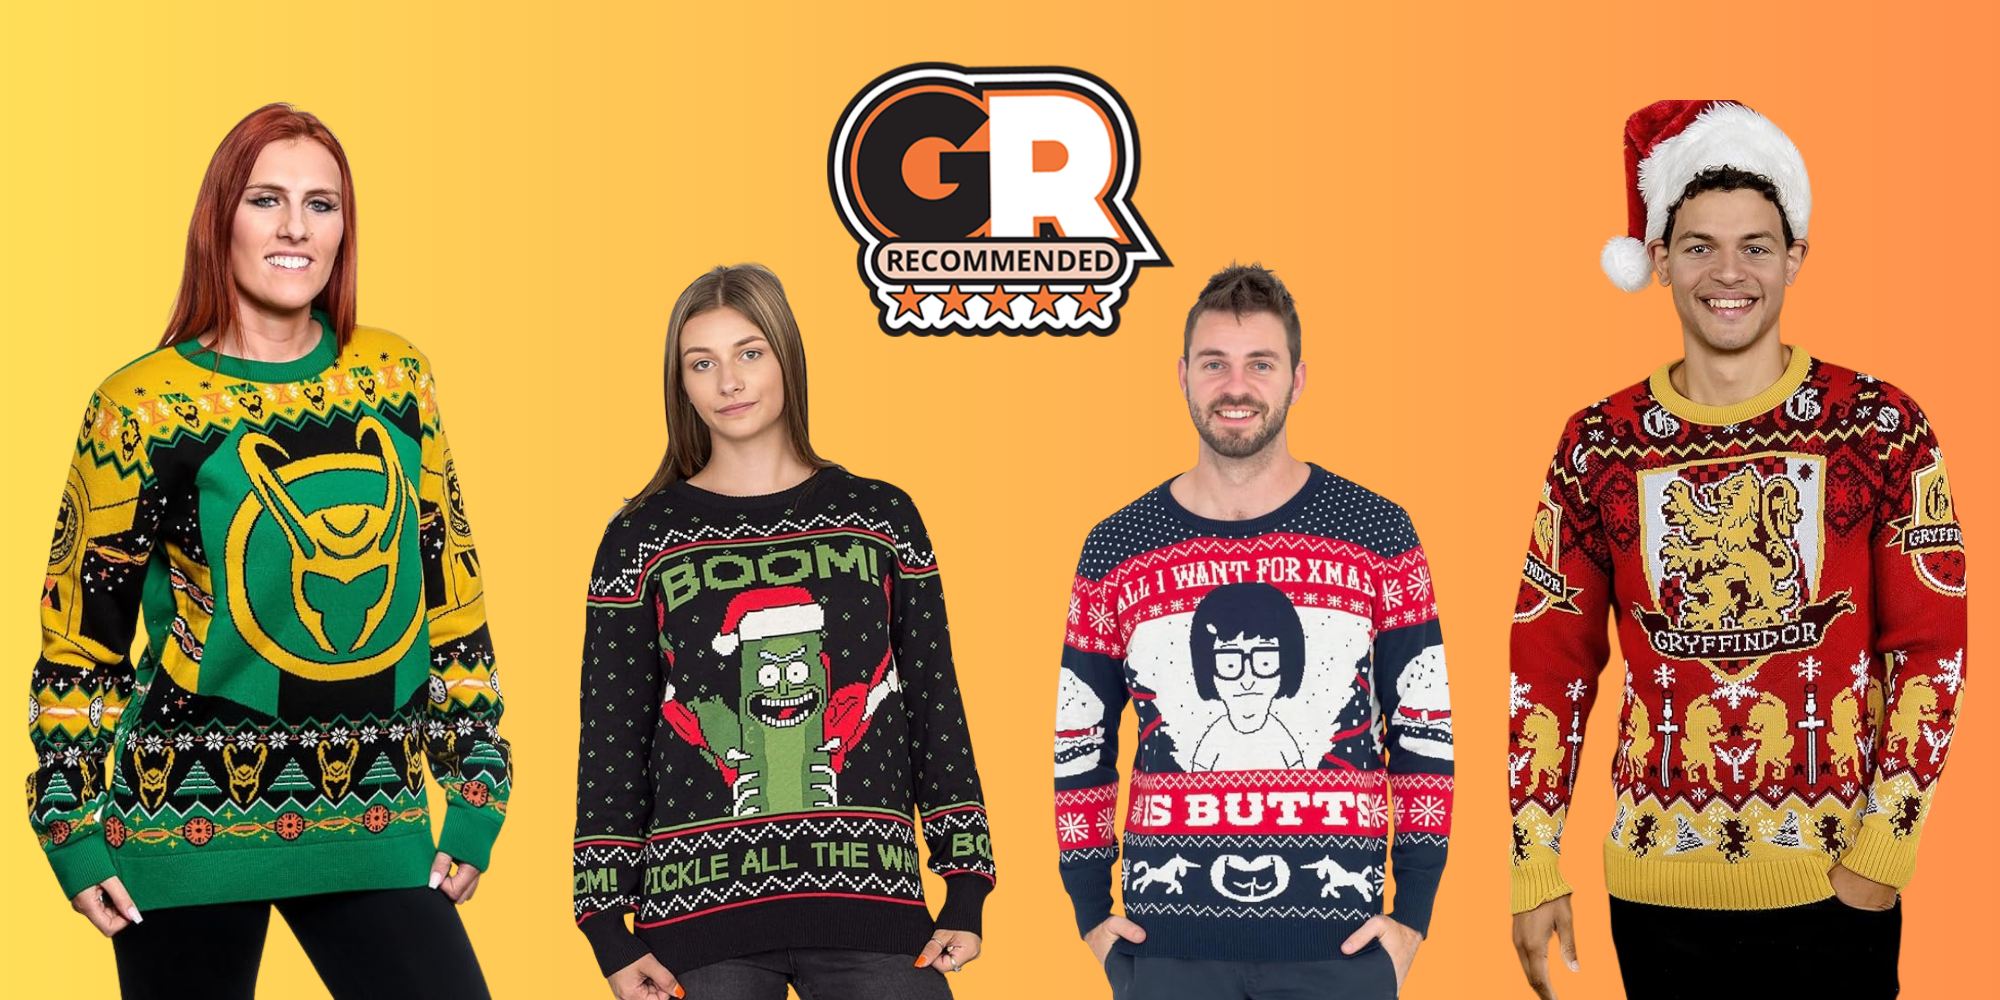 This image features four ugly Christmas sweaters from Loki, Bob's Burgers, Harry Potter, and Rick and Morty. 